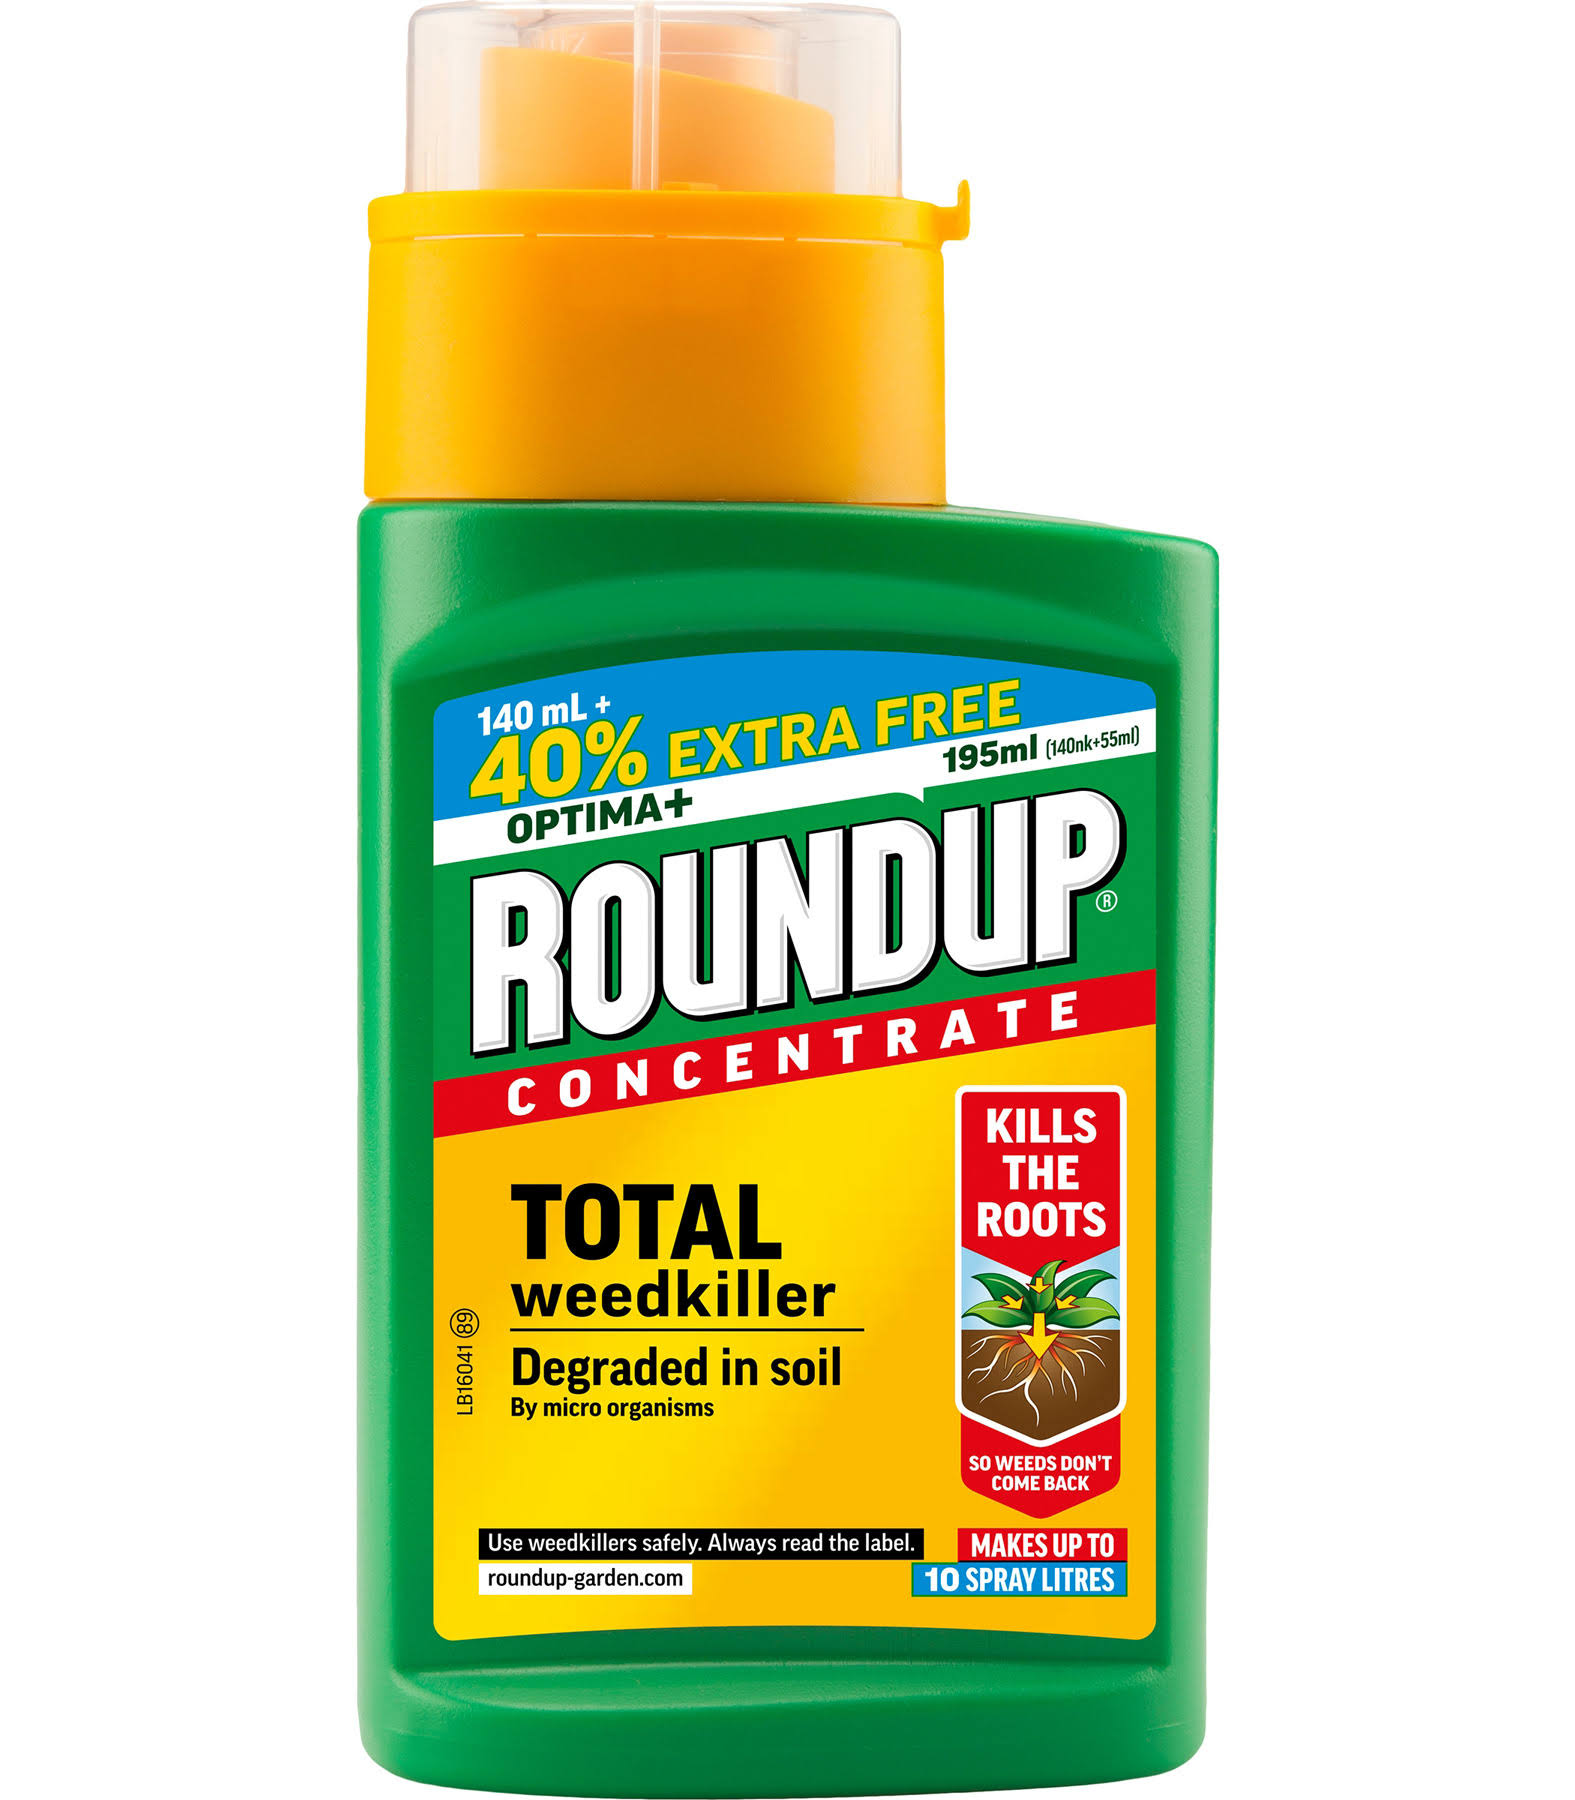 Roundup Total Concentrate (140ml Plus 40% Extra Free)